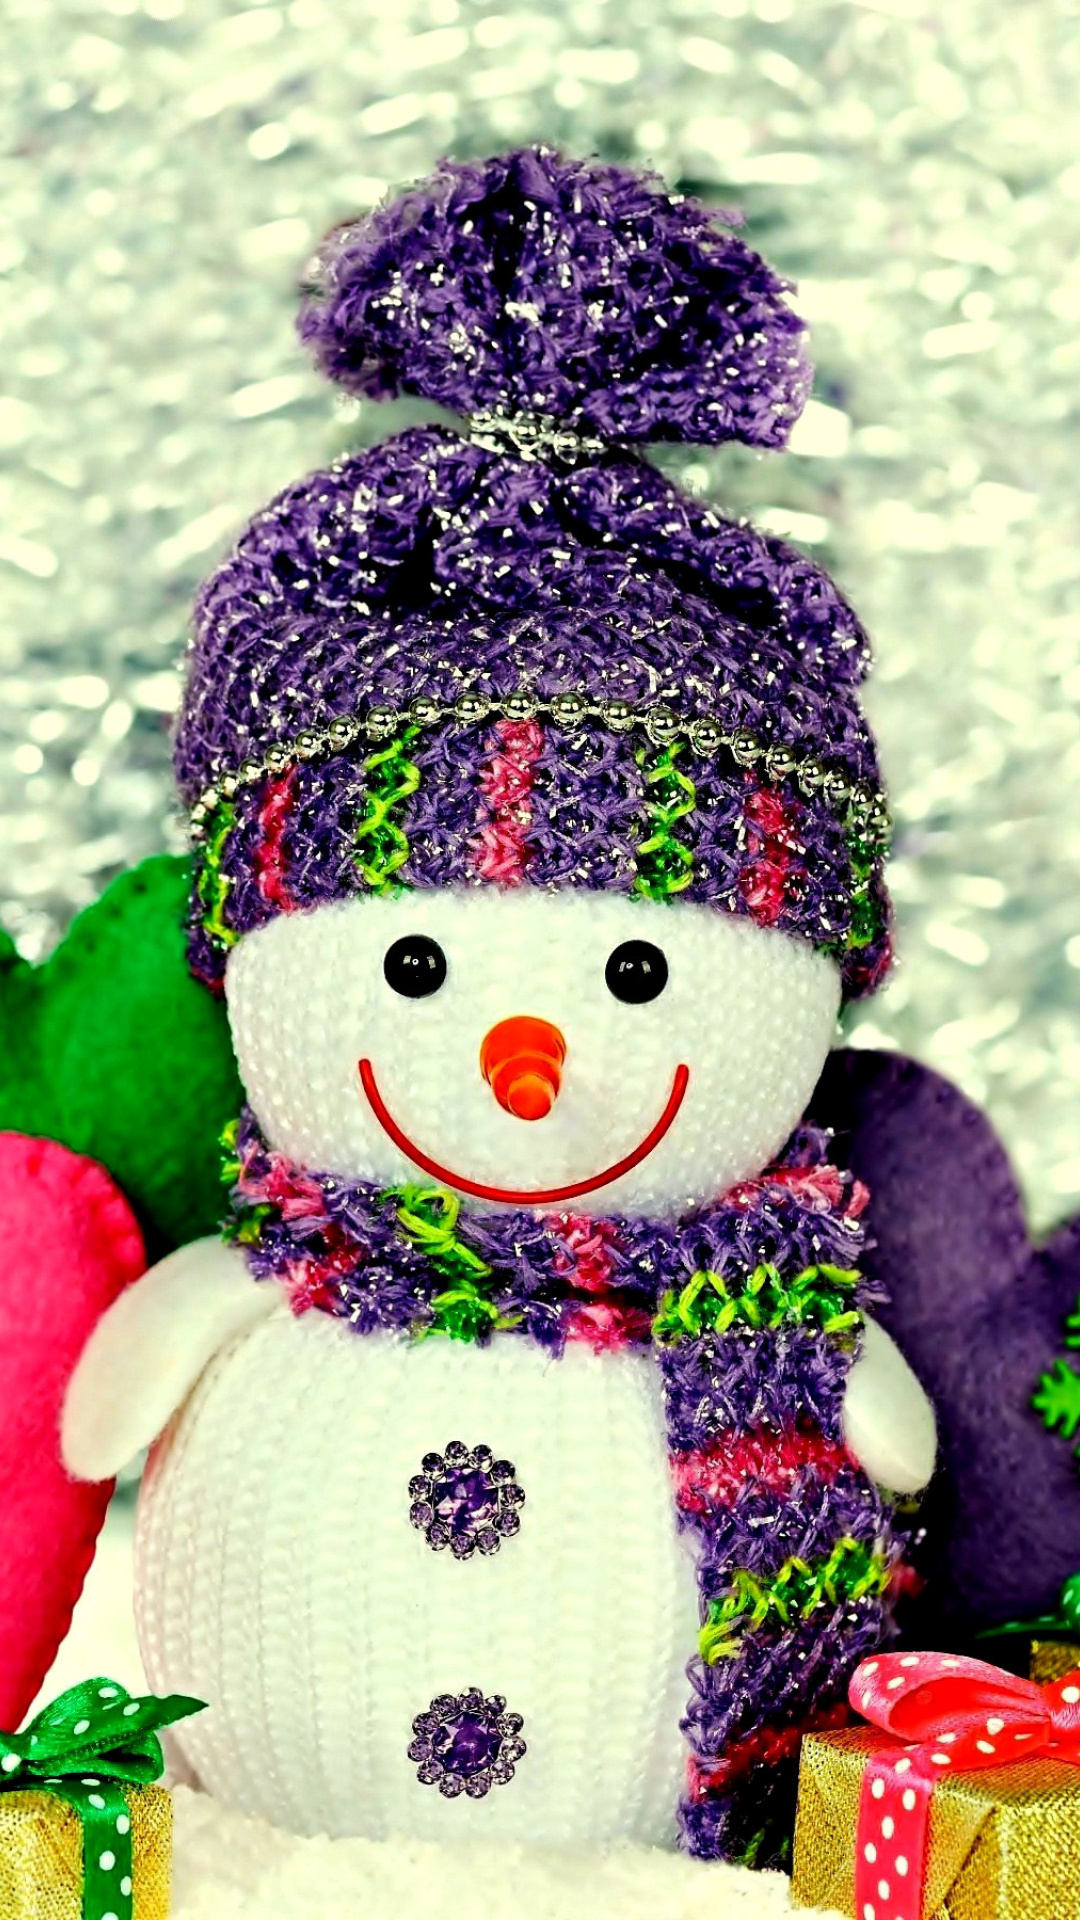 Homemade Snowman with Gifts wallpaper 1080x1920